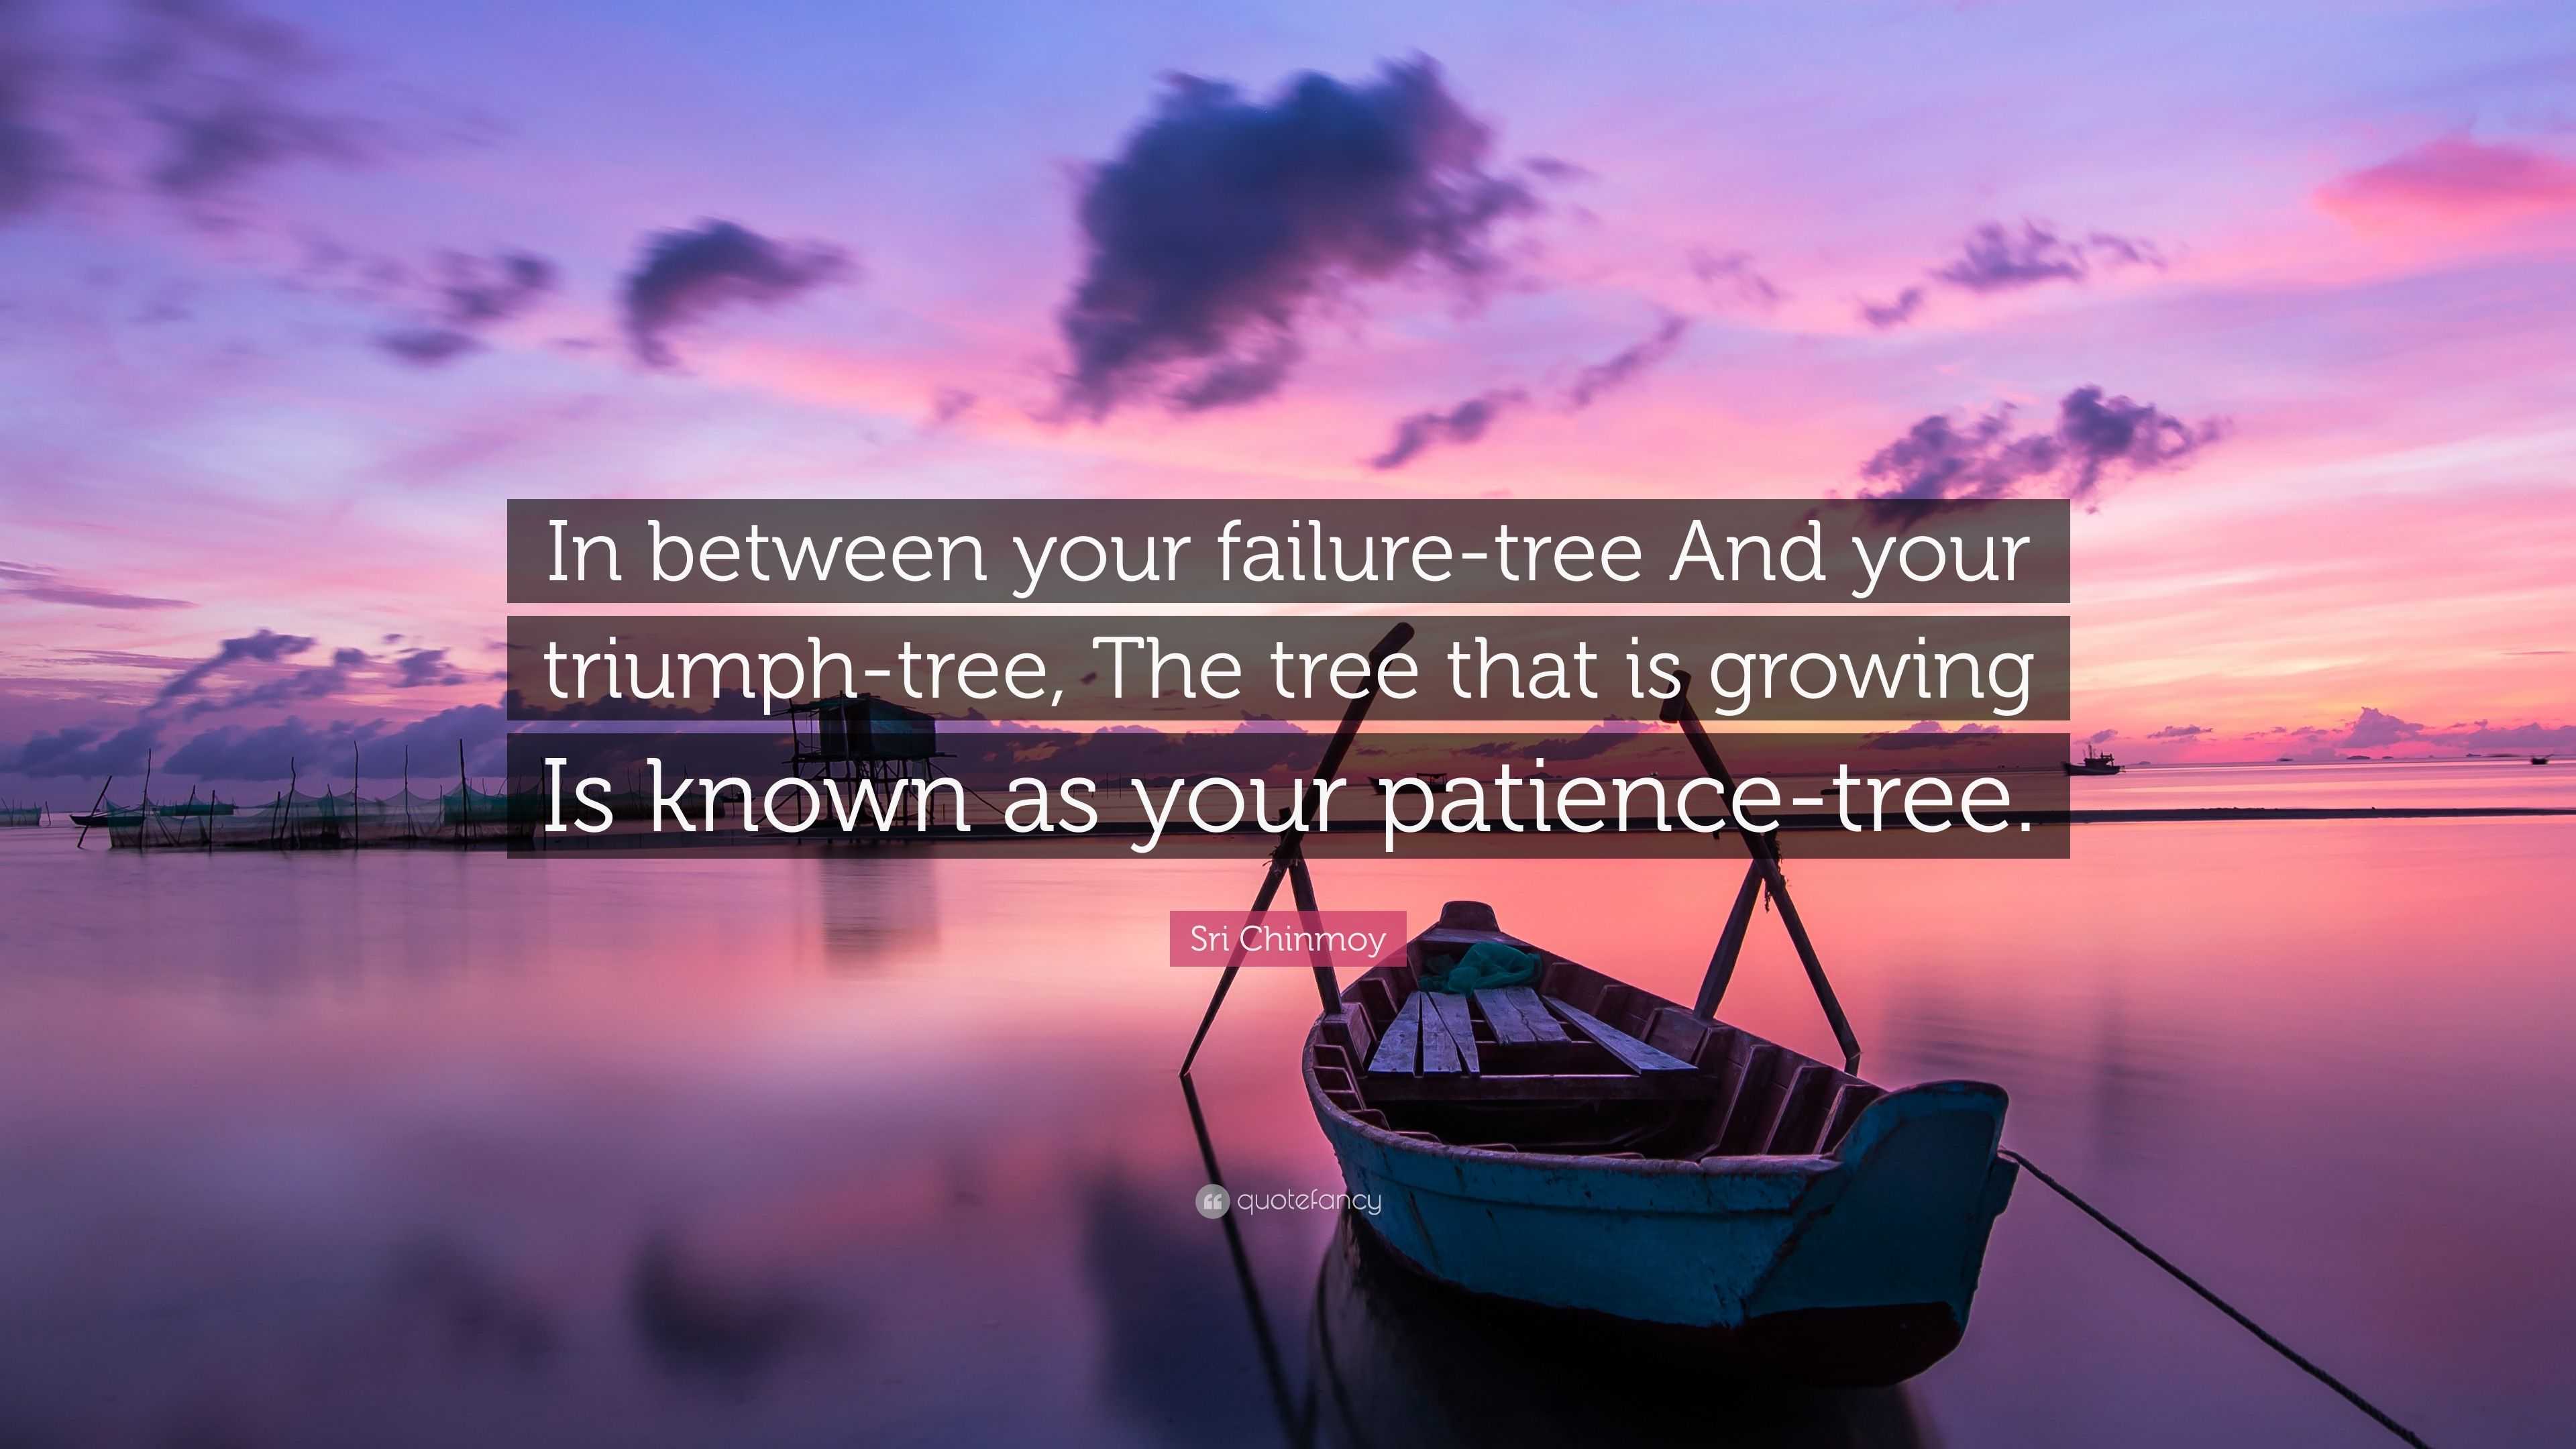 https://quotefancy.com/media/wallpaper/3840x2160/2750199-Sri-Chinmoy-Quote-In-between-your-failure-tree-And-your-triumph.jpg